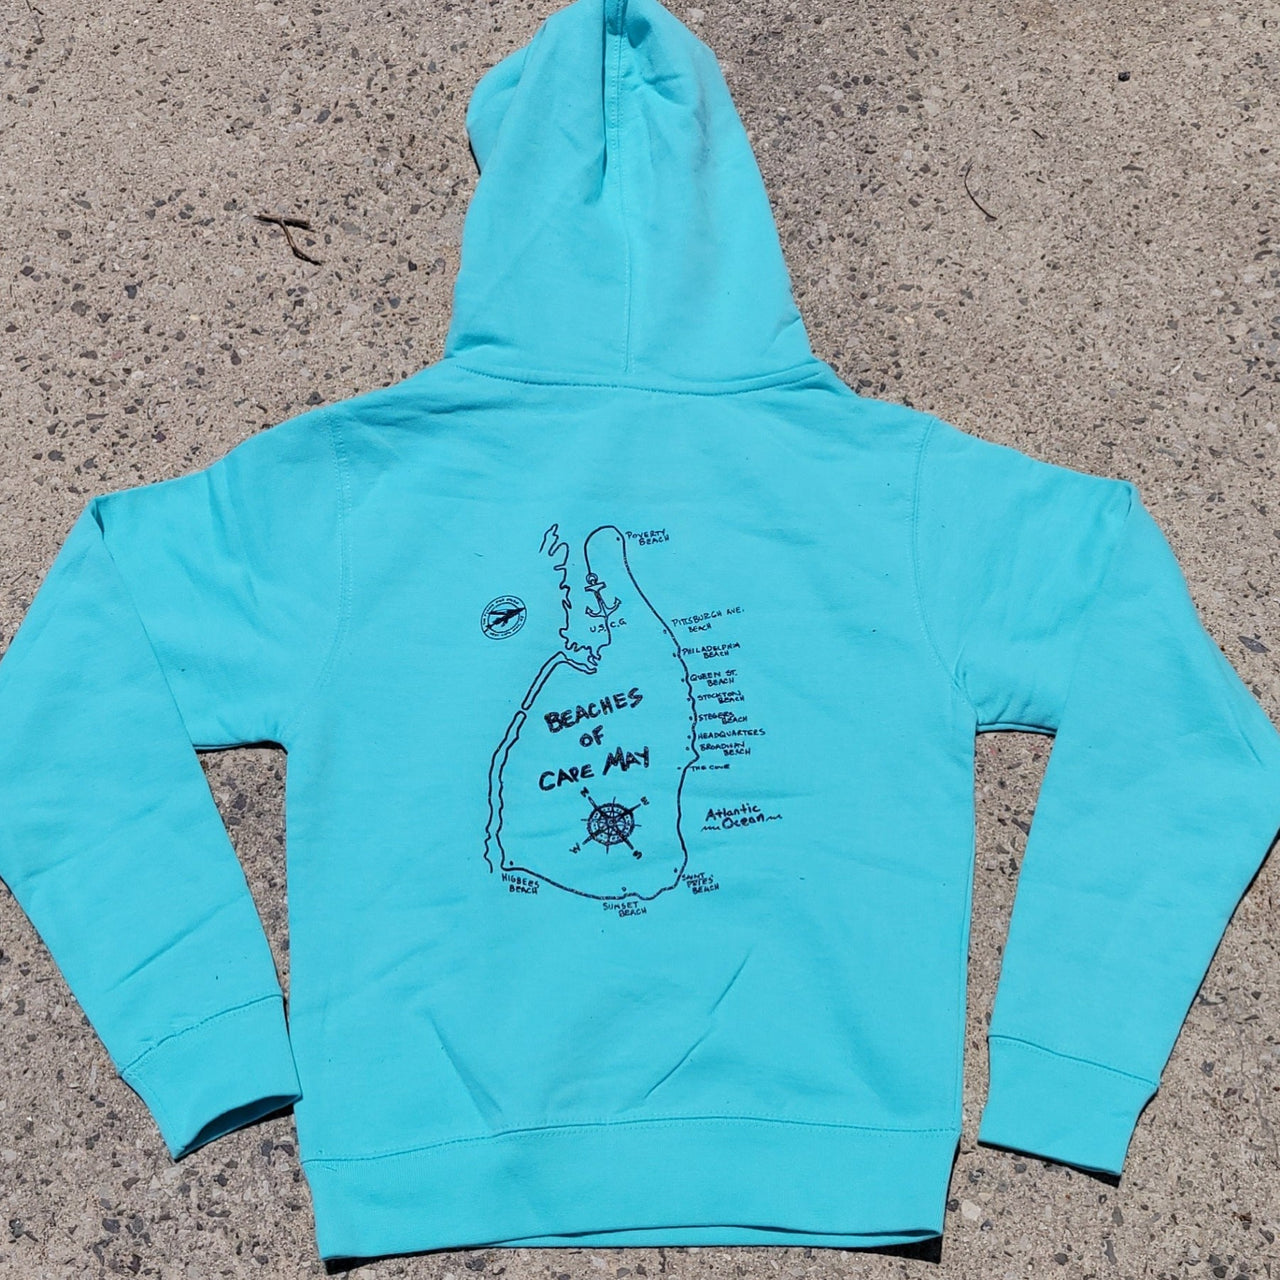 Aqua Blue, pull-over hoodie featuring the 'Beaches of Cape May' design on the center back in navy ink.